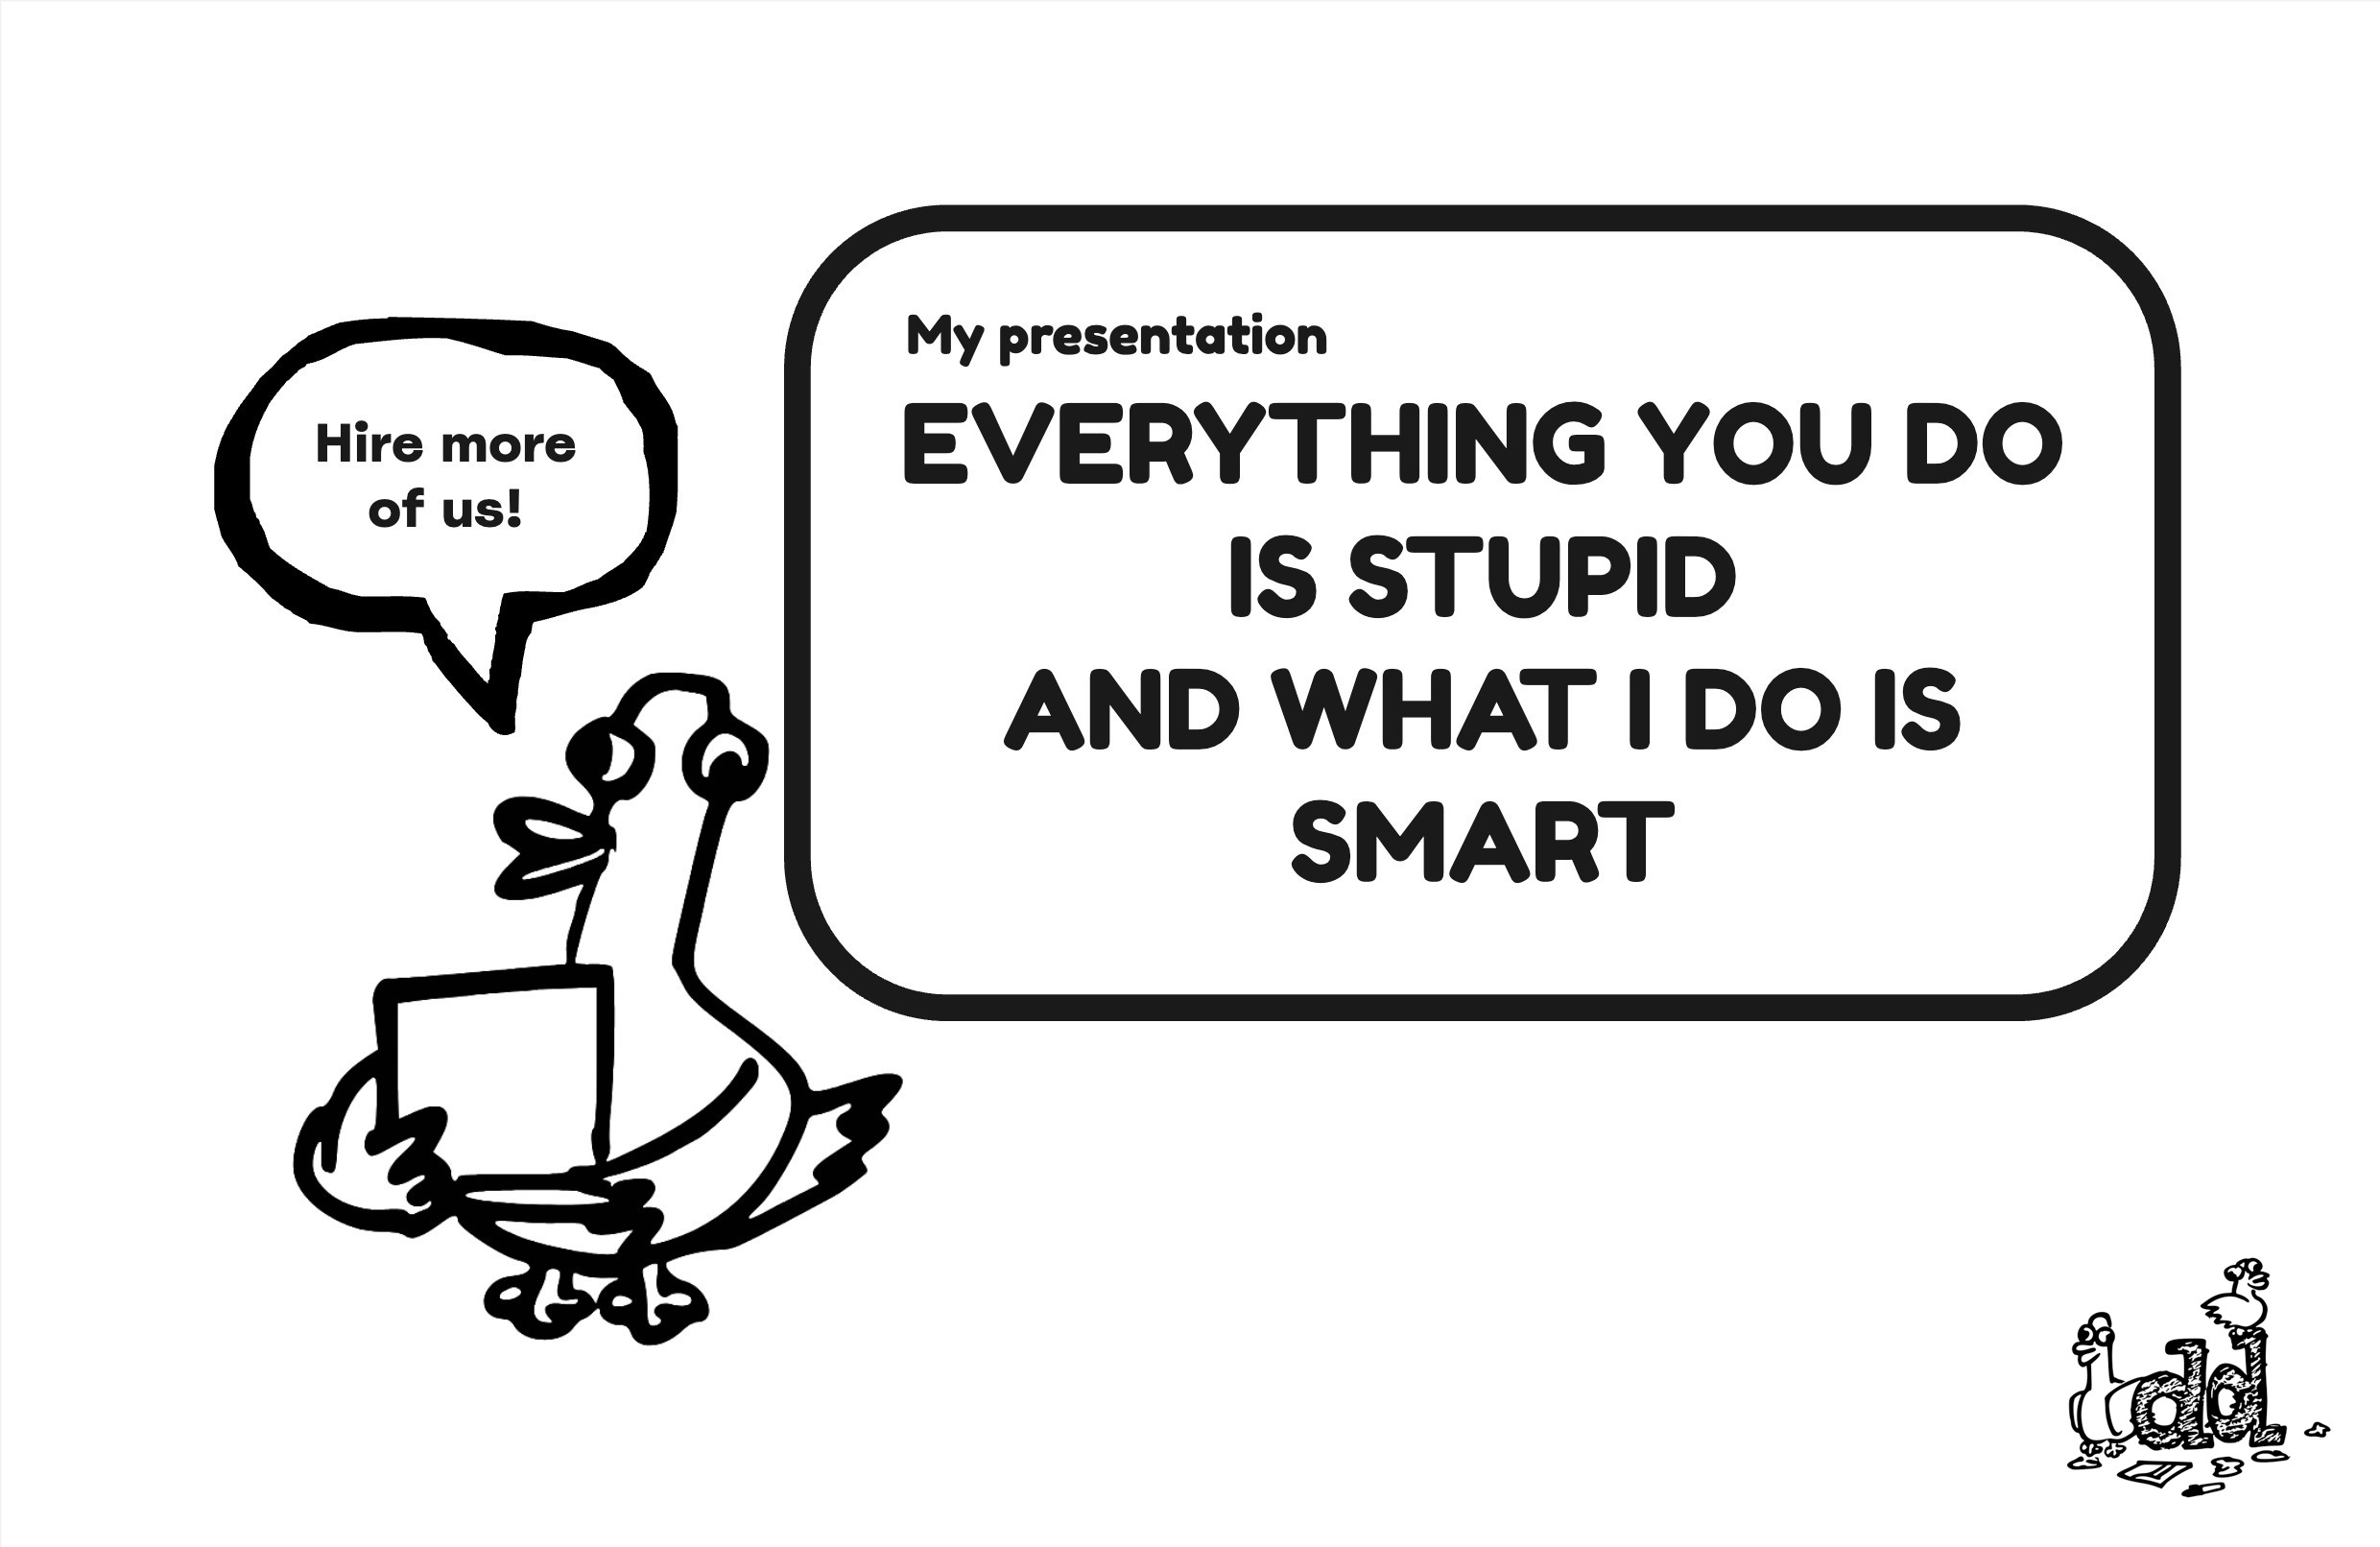 Cartoon. A duck standing in front of a presentation saying 'hire more of us'. The presentation slide says 'everything you do is stupid and what I do is smart' - by Andrew Duckworth